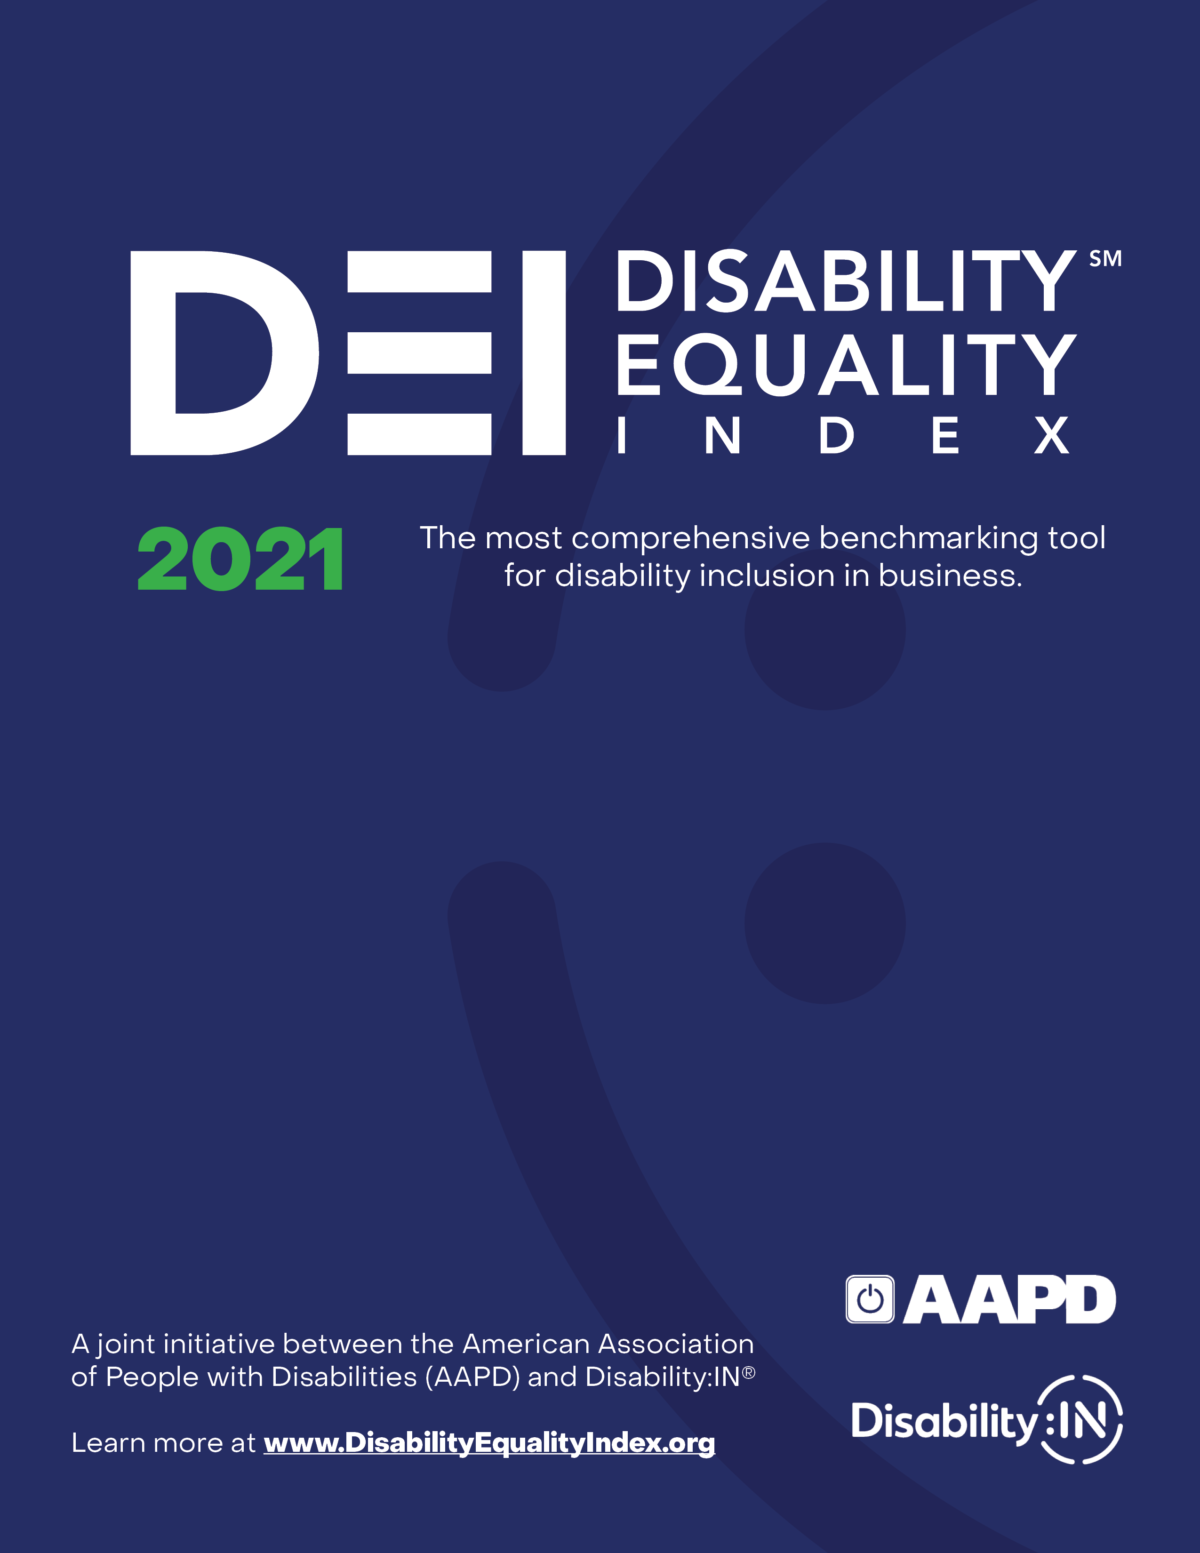 Disability Equality Index DisabilityIN